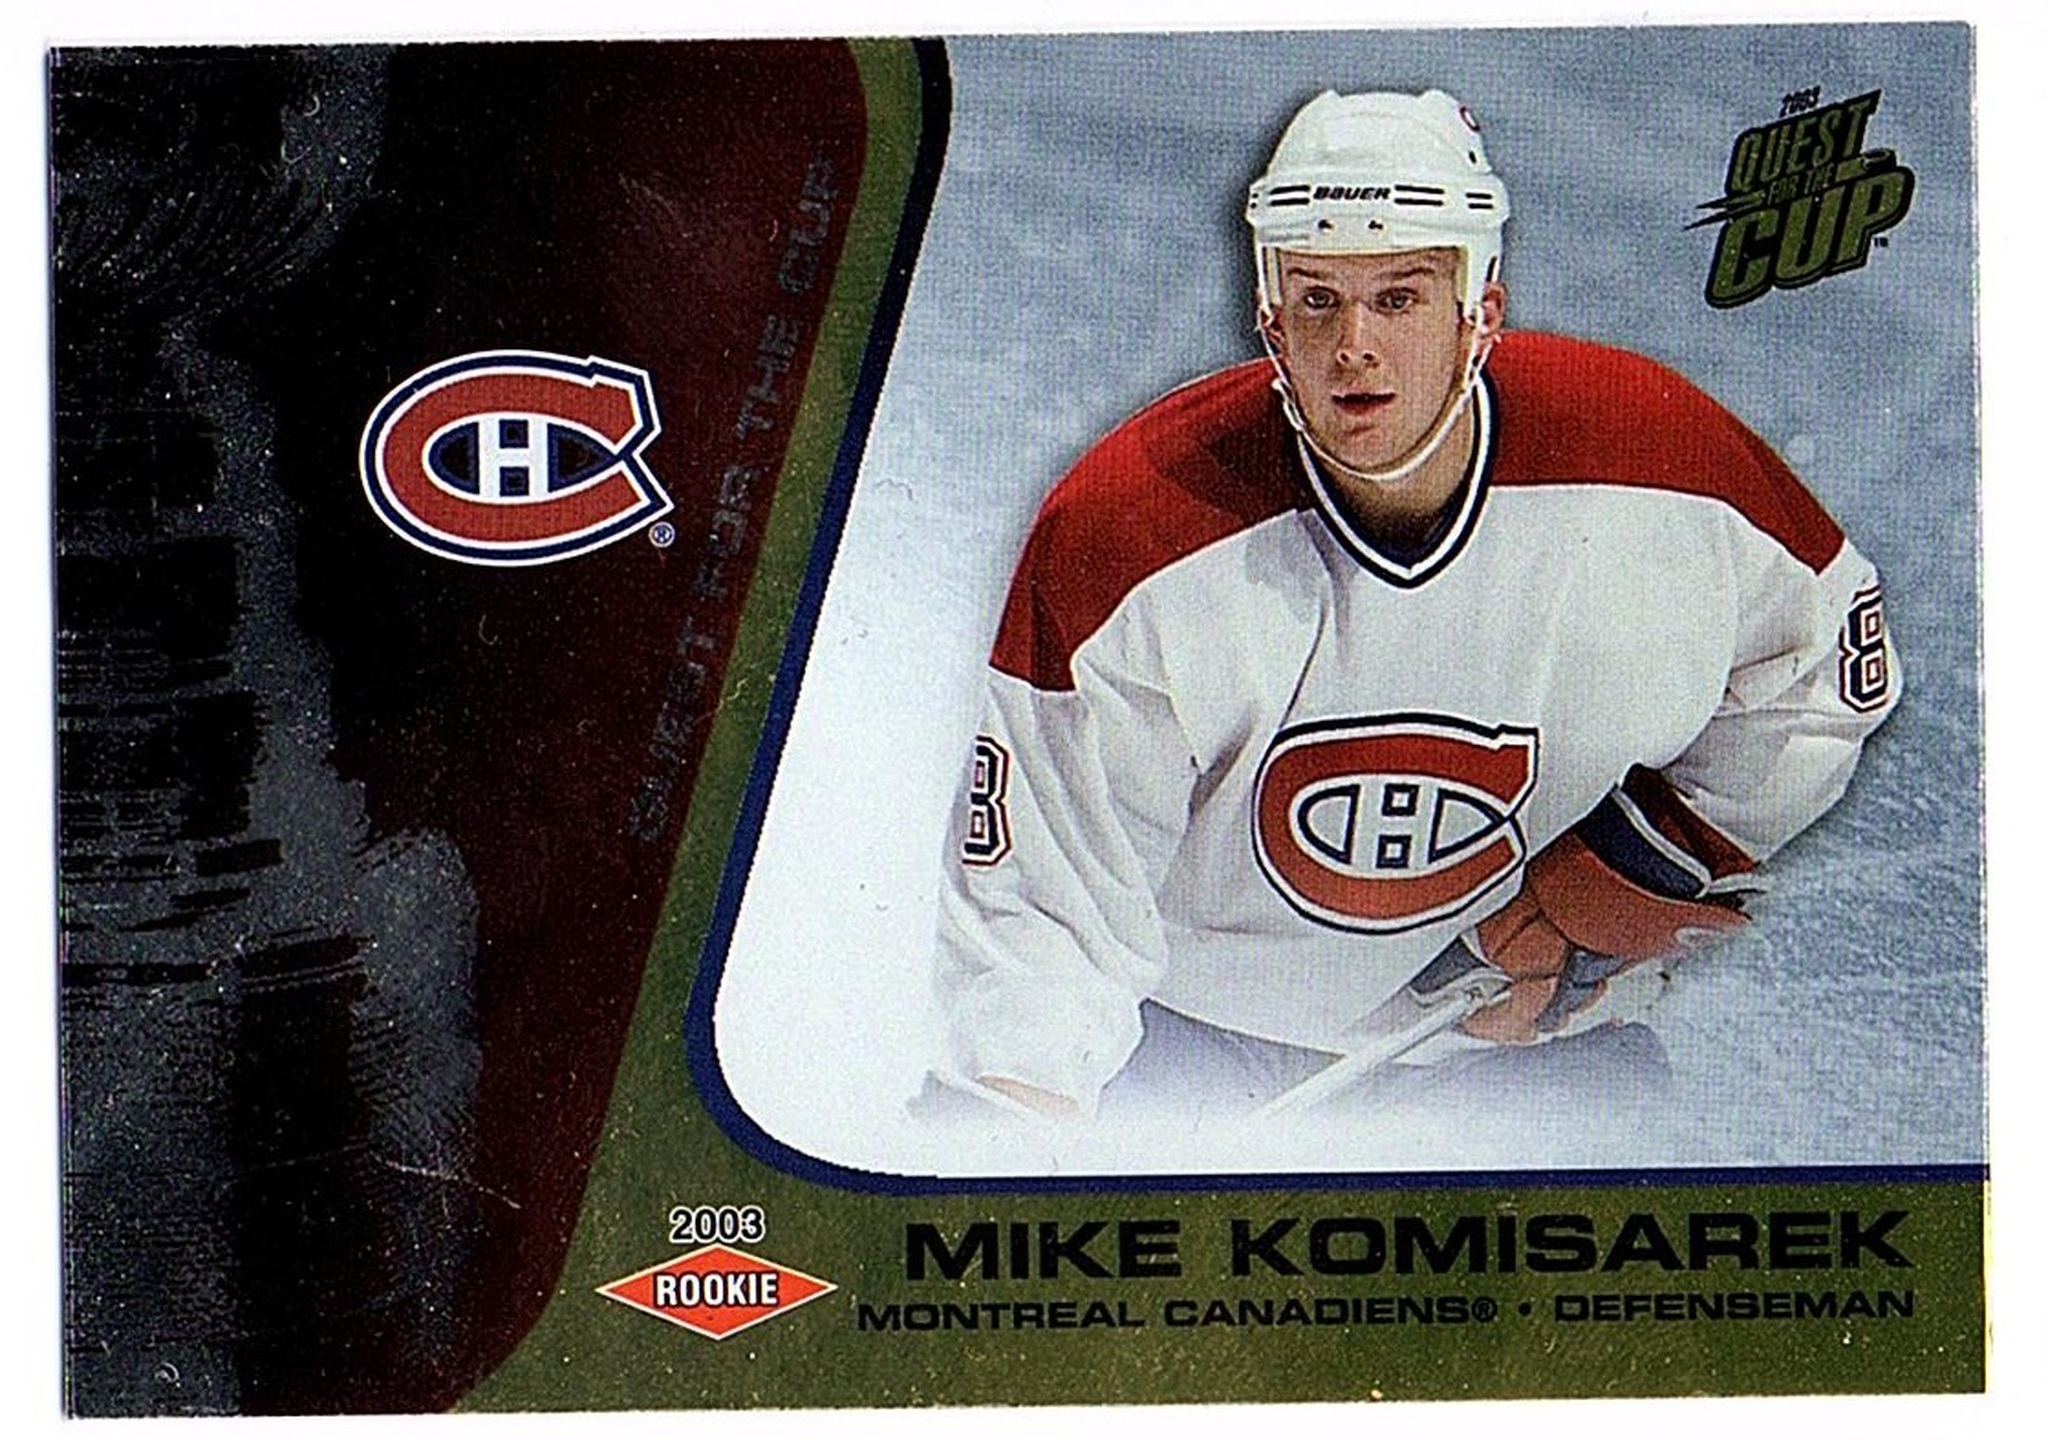 2002-03 Pacific Quest For the Cup Gold #127 Mike Komisarek (15-X47-CANADIENS)